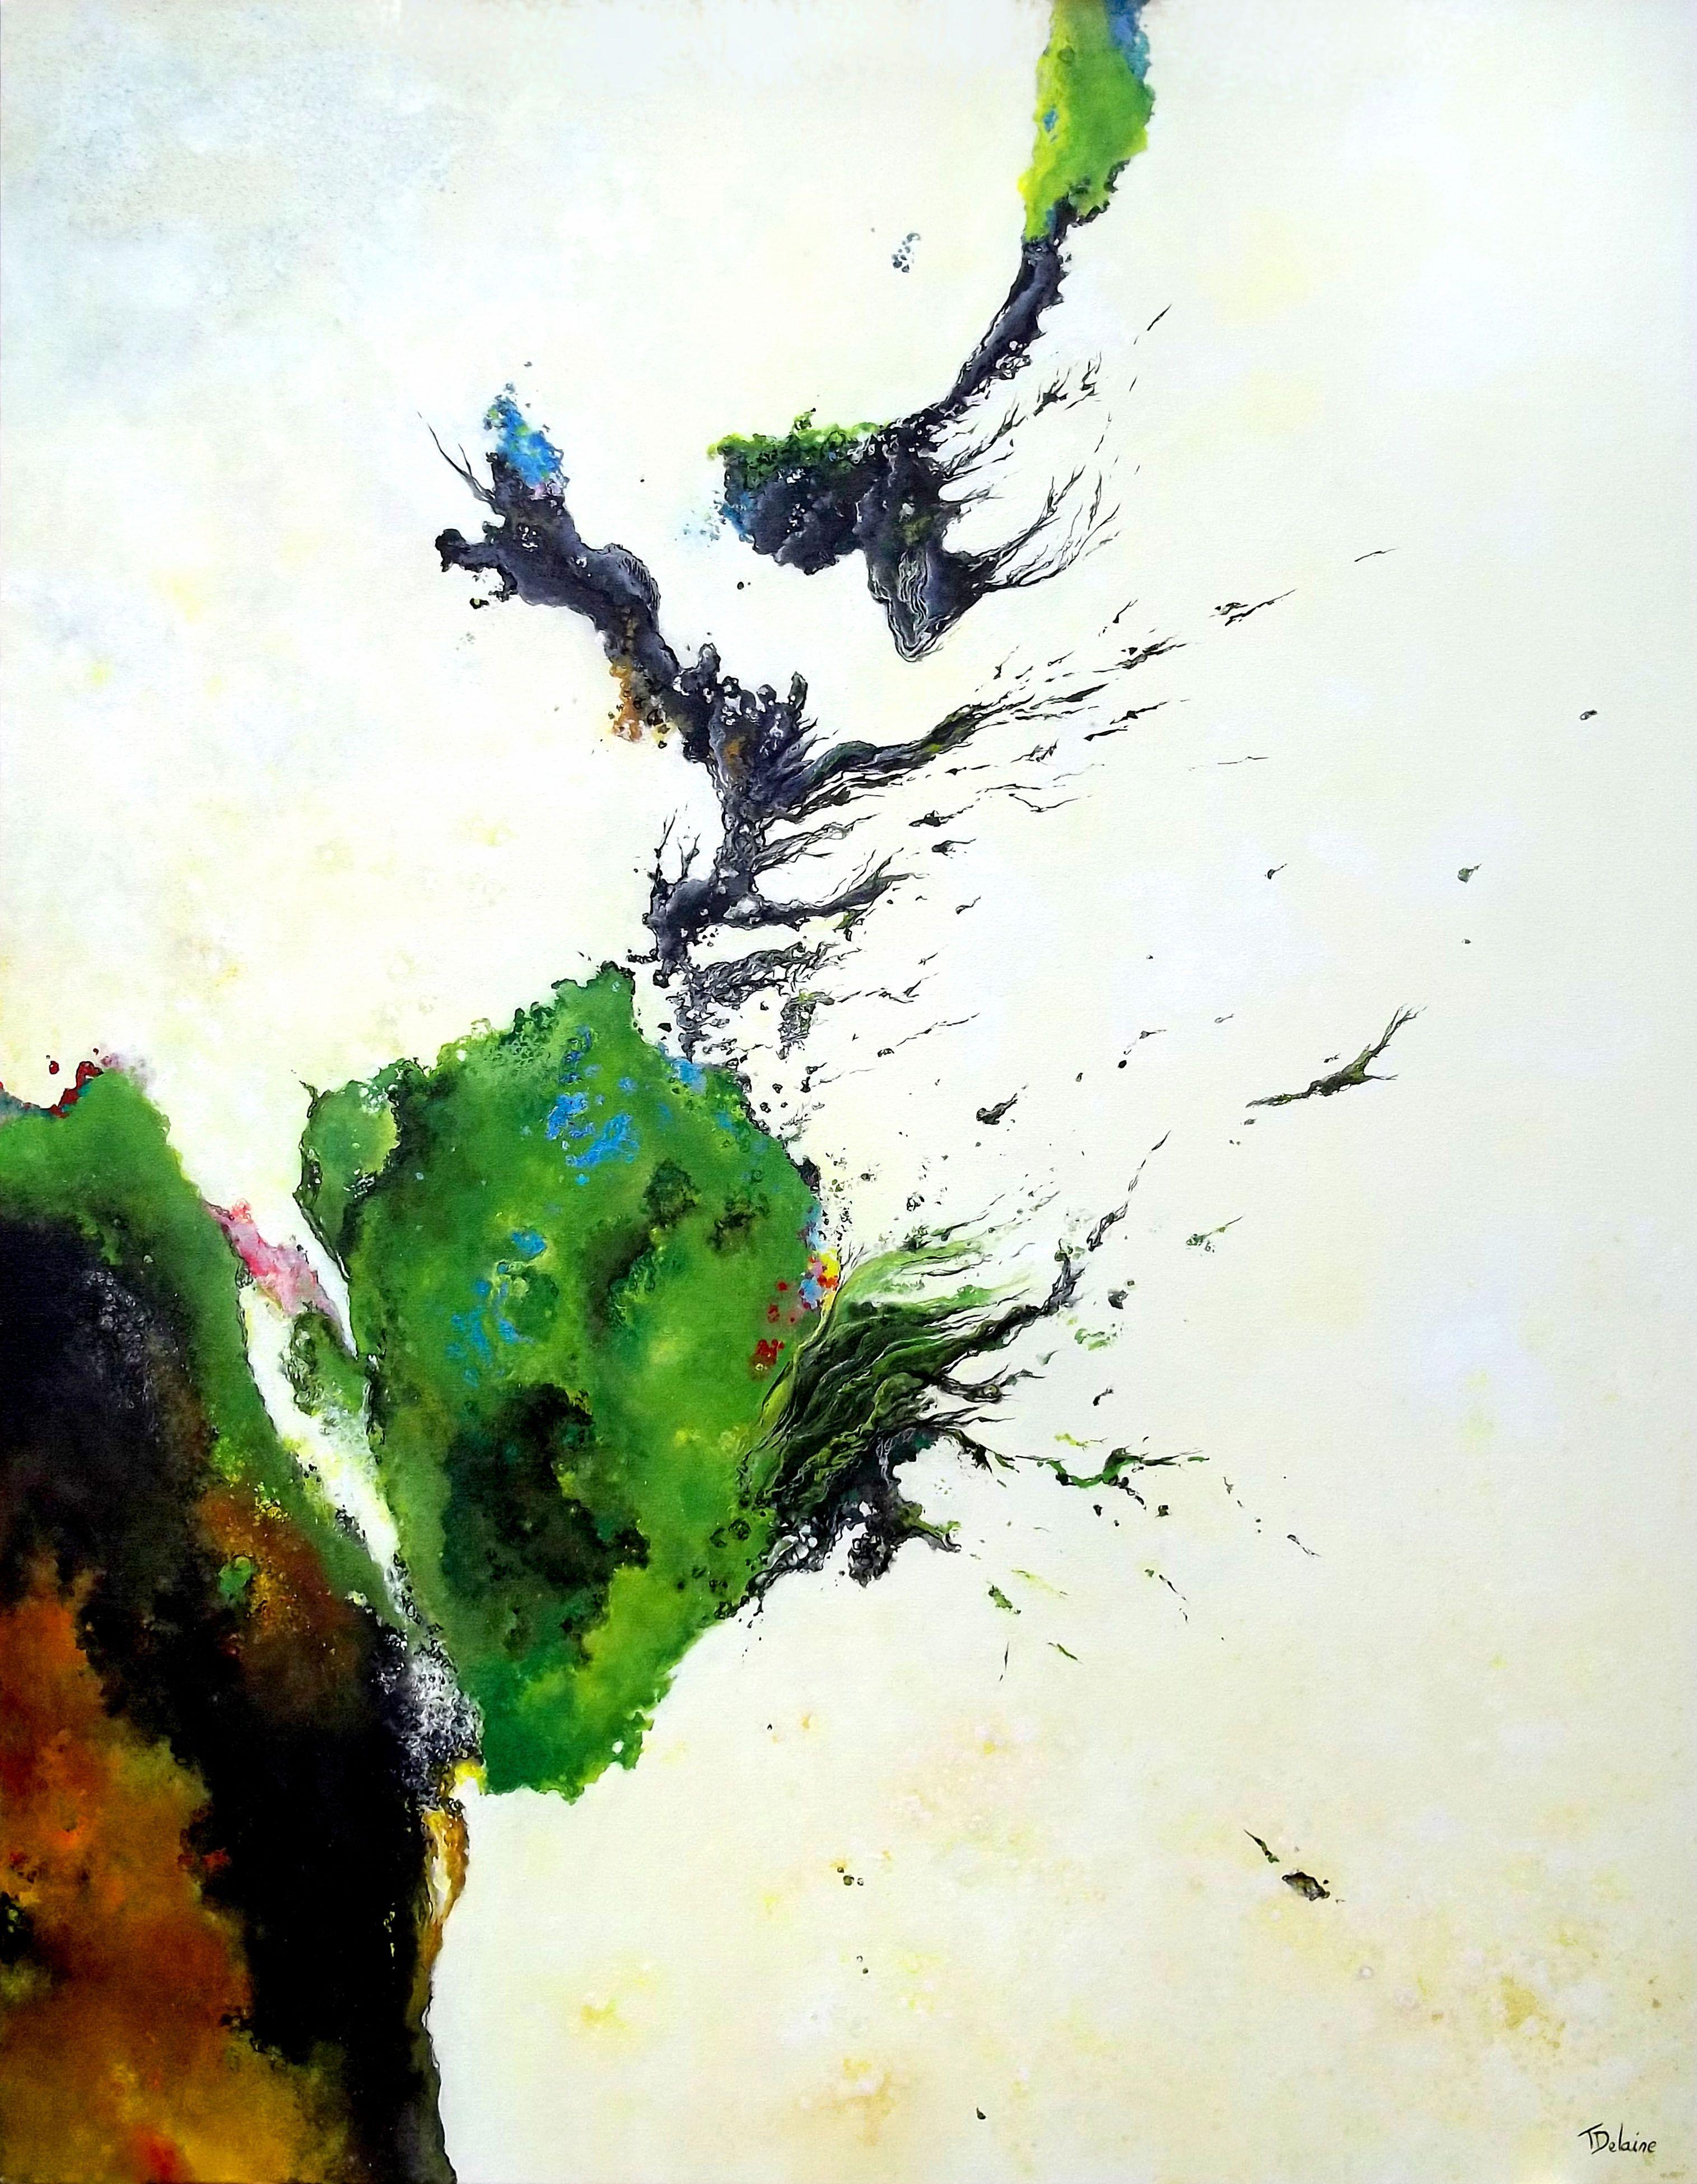 Theophile DELAINE Abstract Painting - The blossom of hope and breaking, Painting, Oil on Canvas